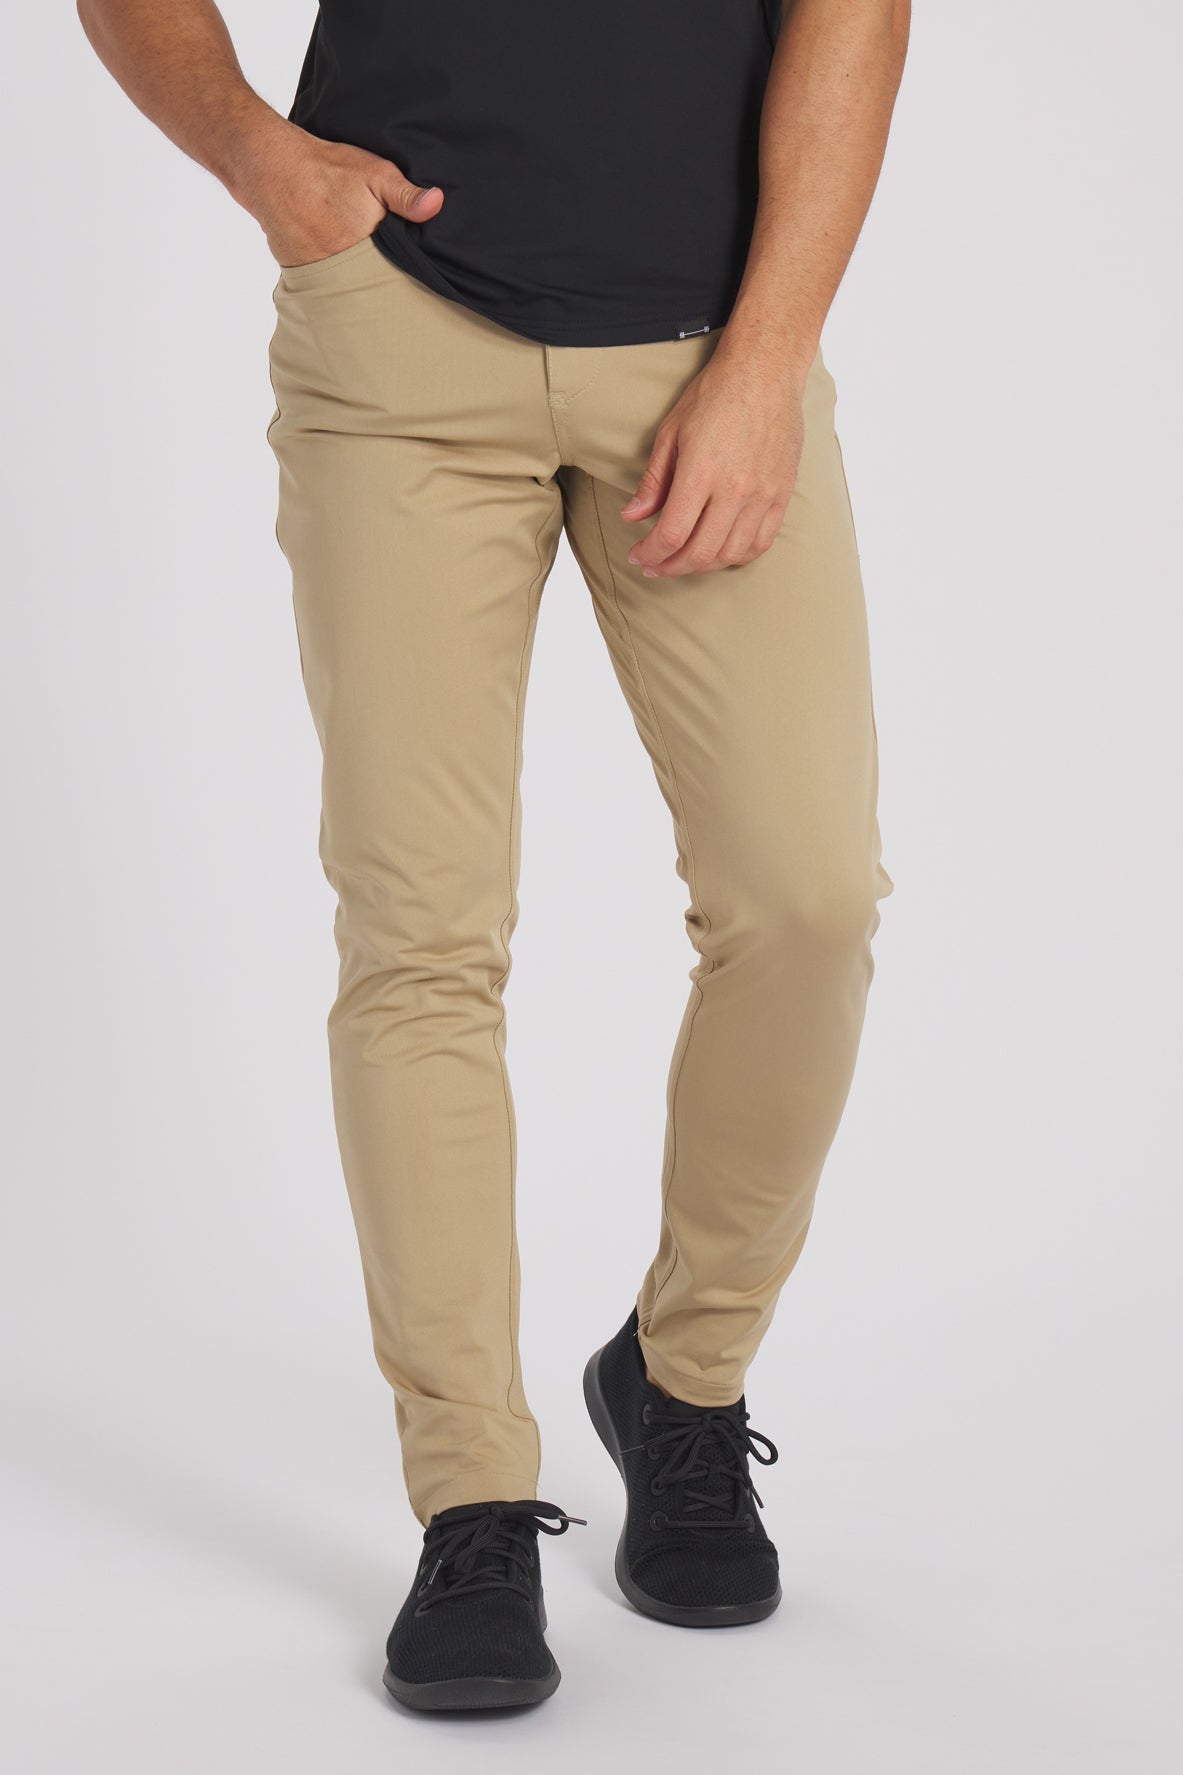 Anything Pant Slim - Khaki - photo from front in focus #color_khaki